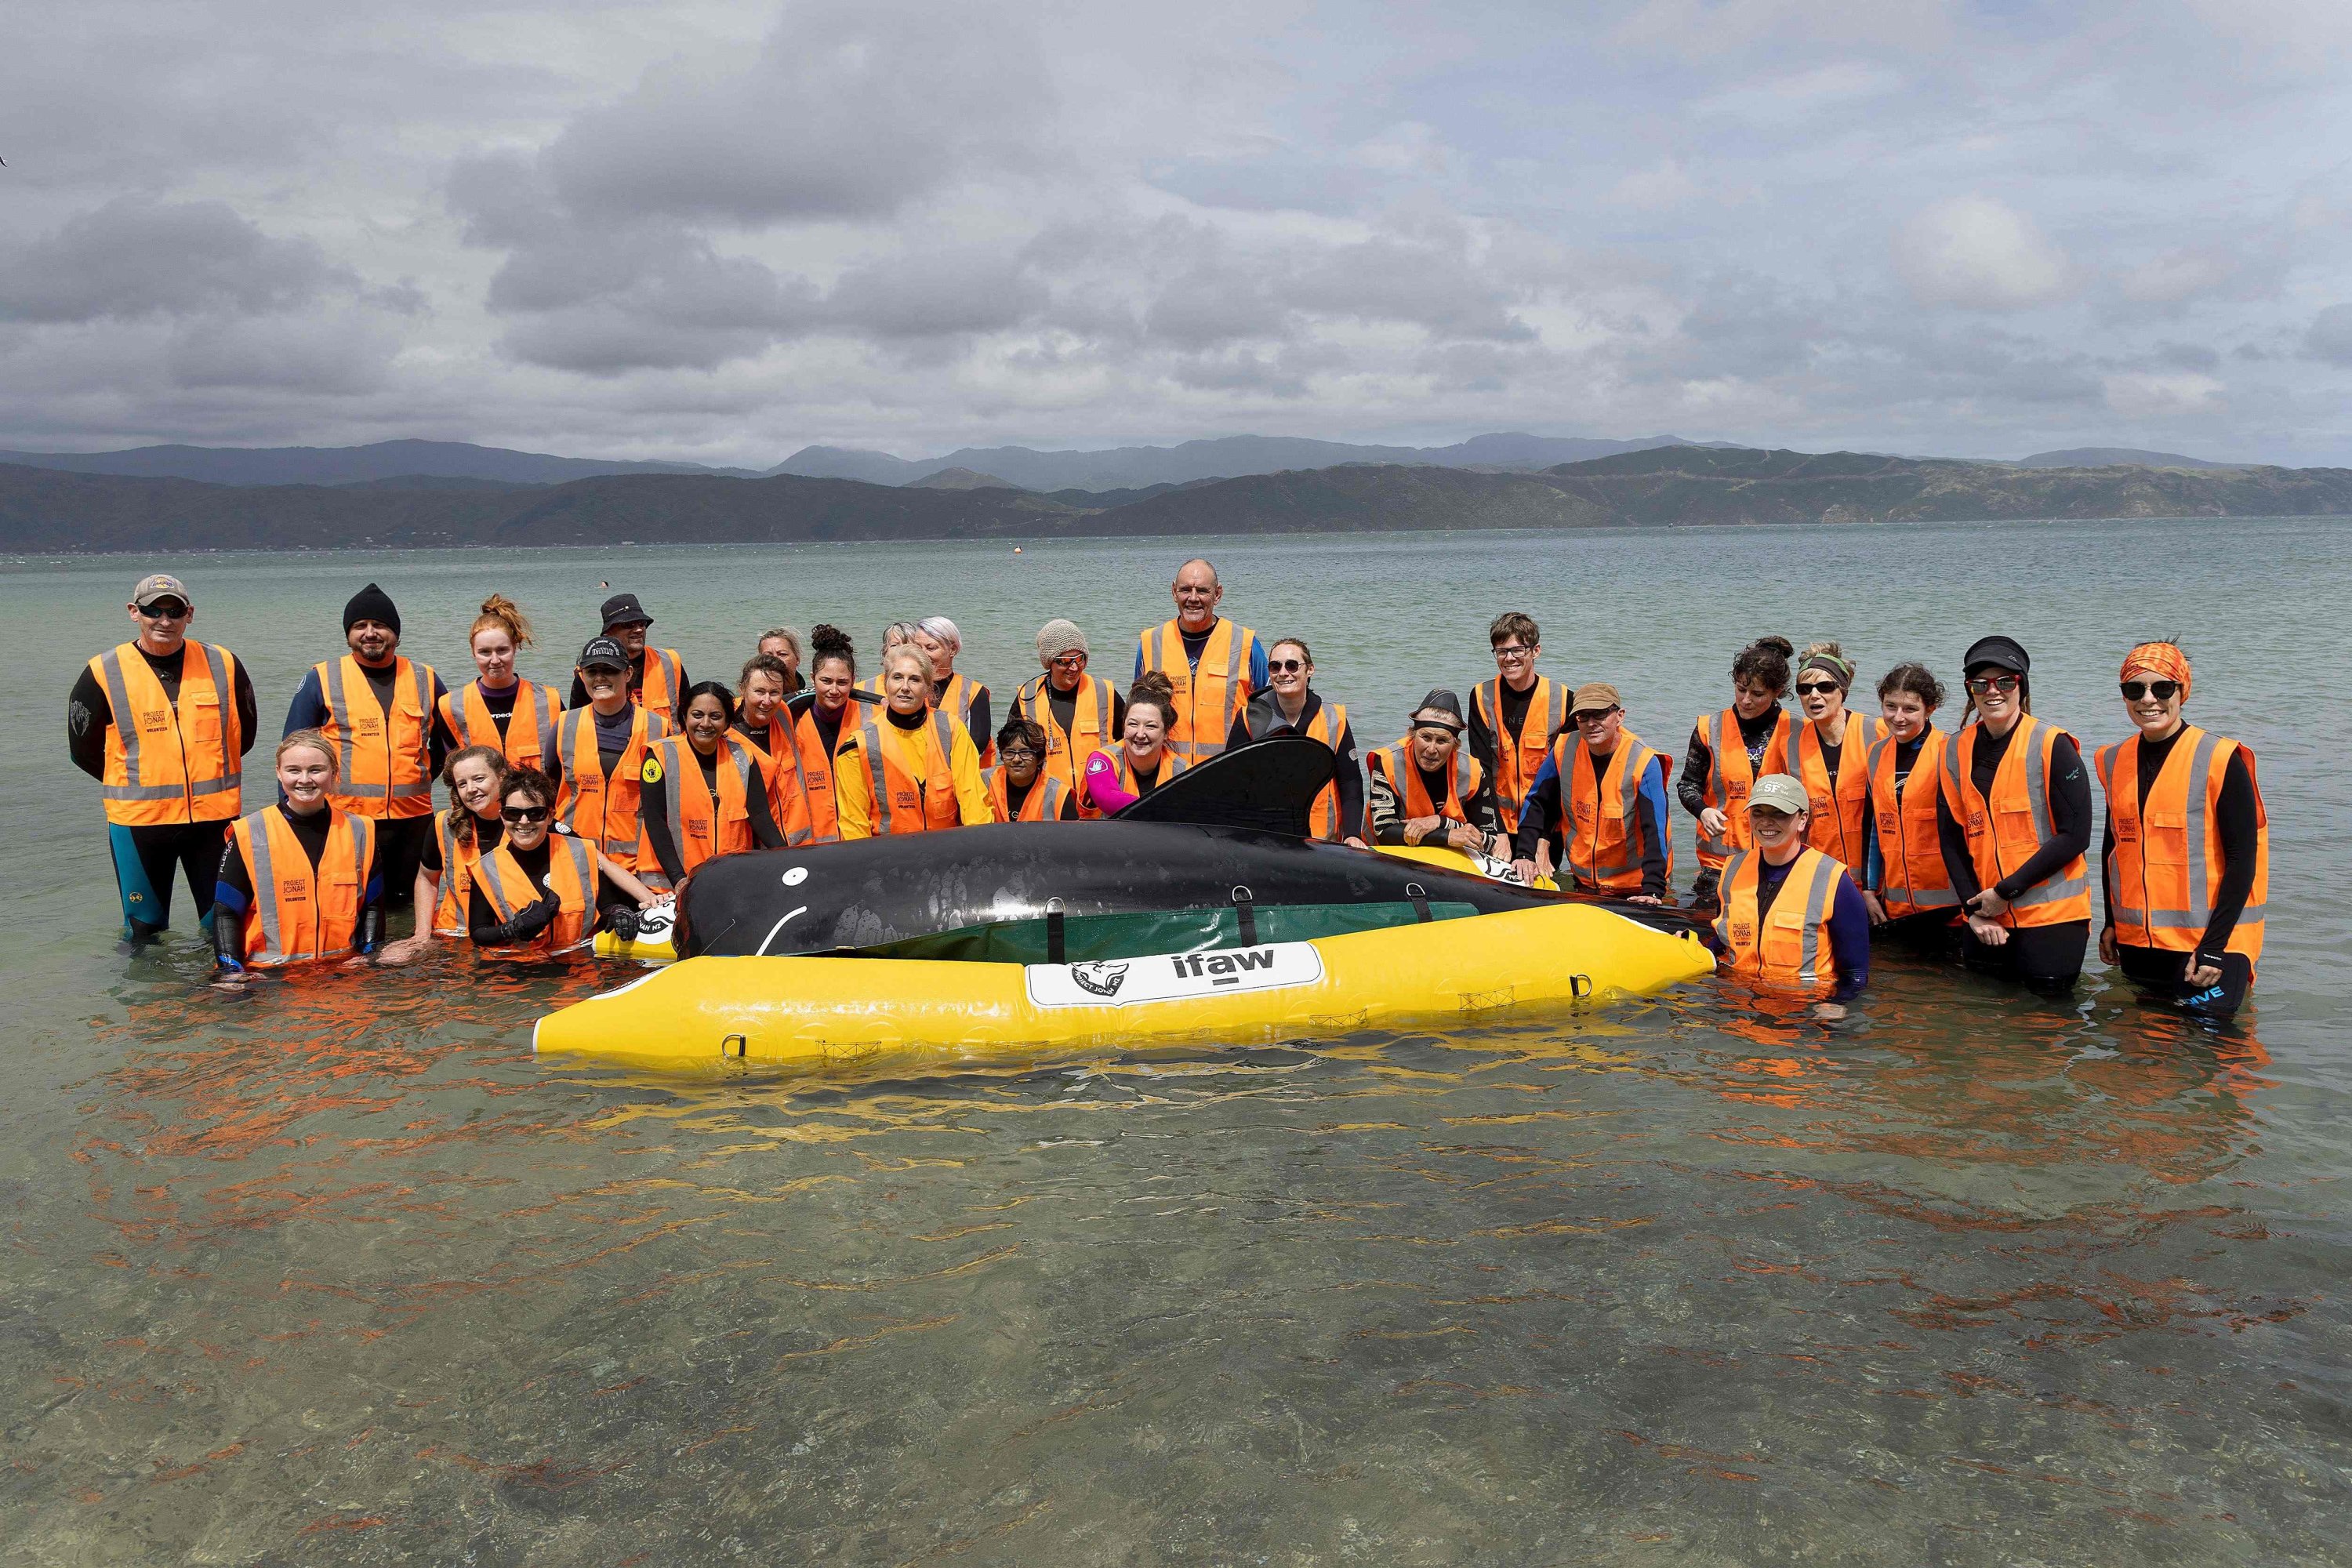 A group of New Zealand whale rescue charity Project Jonah volunteers and trainers pose for a photo as they attend a class on how to save stranded whales, at Scorching Bay in Wellington, Dec. 11, 2021. (AFP Photo)